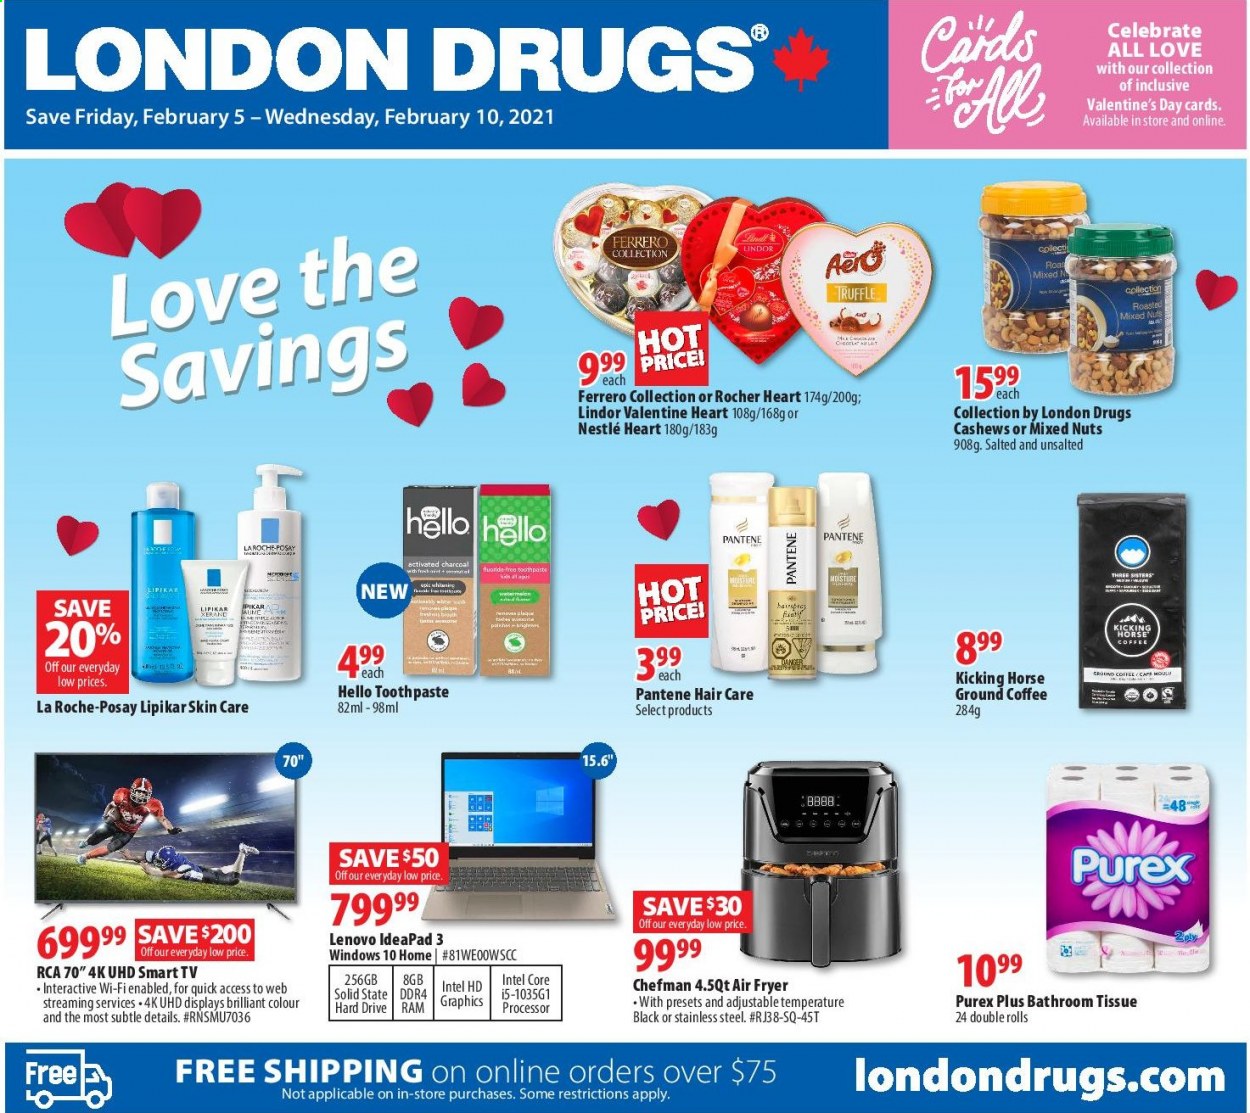 thumbnail - London Drugs Flyer - February 05, 2021 - February 10, 2021 - Sales products - Intel, truffles, Ace, cashews, mixed nuts, coffee, ground coffee, bath tissue, Purex, toothpaste, La Roche-Posay, Valentine's Day Card, hard disk, RCA, UHD TV, TV, Chefman, air fryer, activated charcoal, Nestlé, Lenovo, smart tv, Pantene. Page 1.